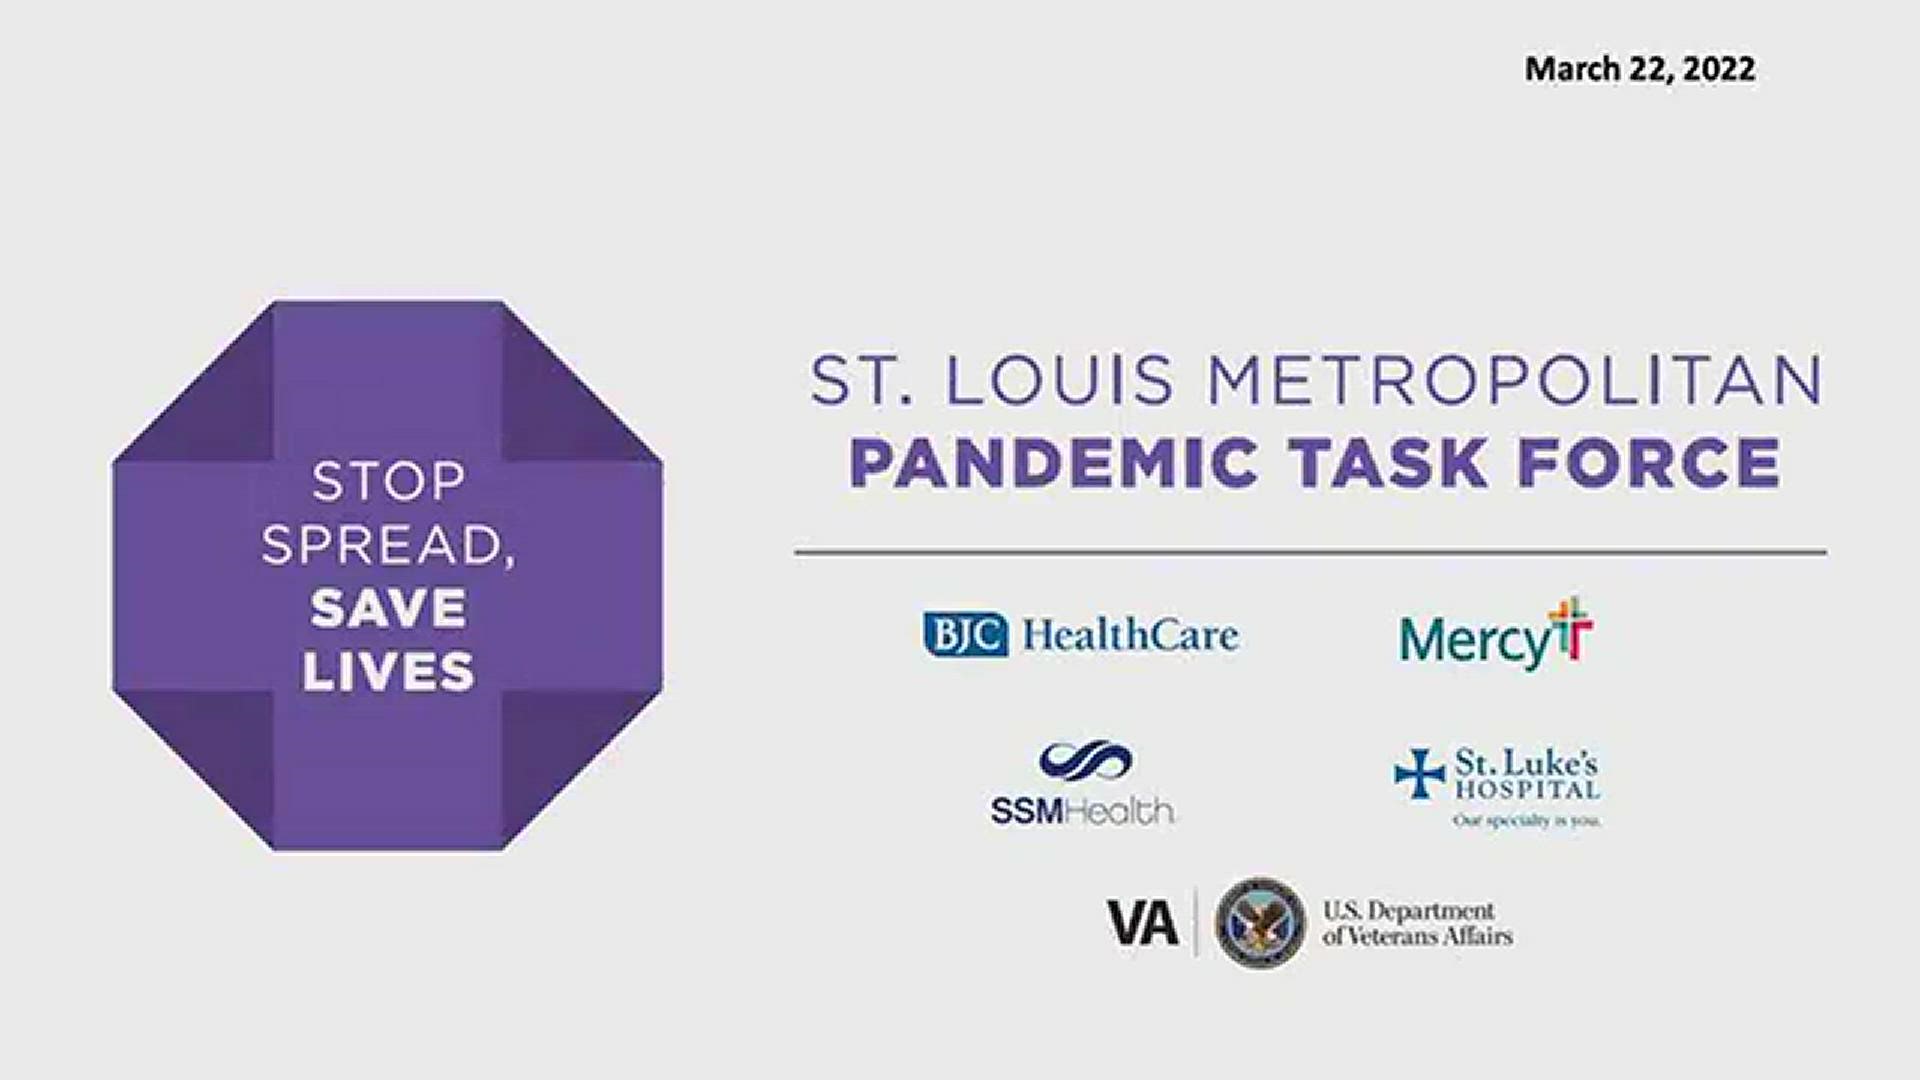 The St. Louis area is in the midst of a steady increase in COVID-19 cases. St. Louis Metropolitan Pandemic Task Force leaders said people should consider precautions